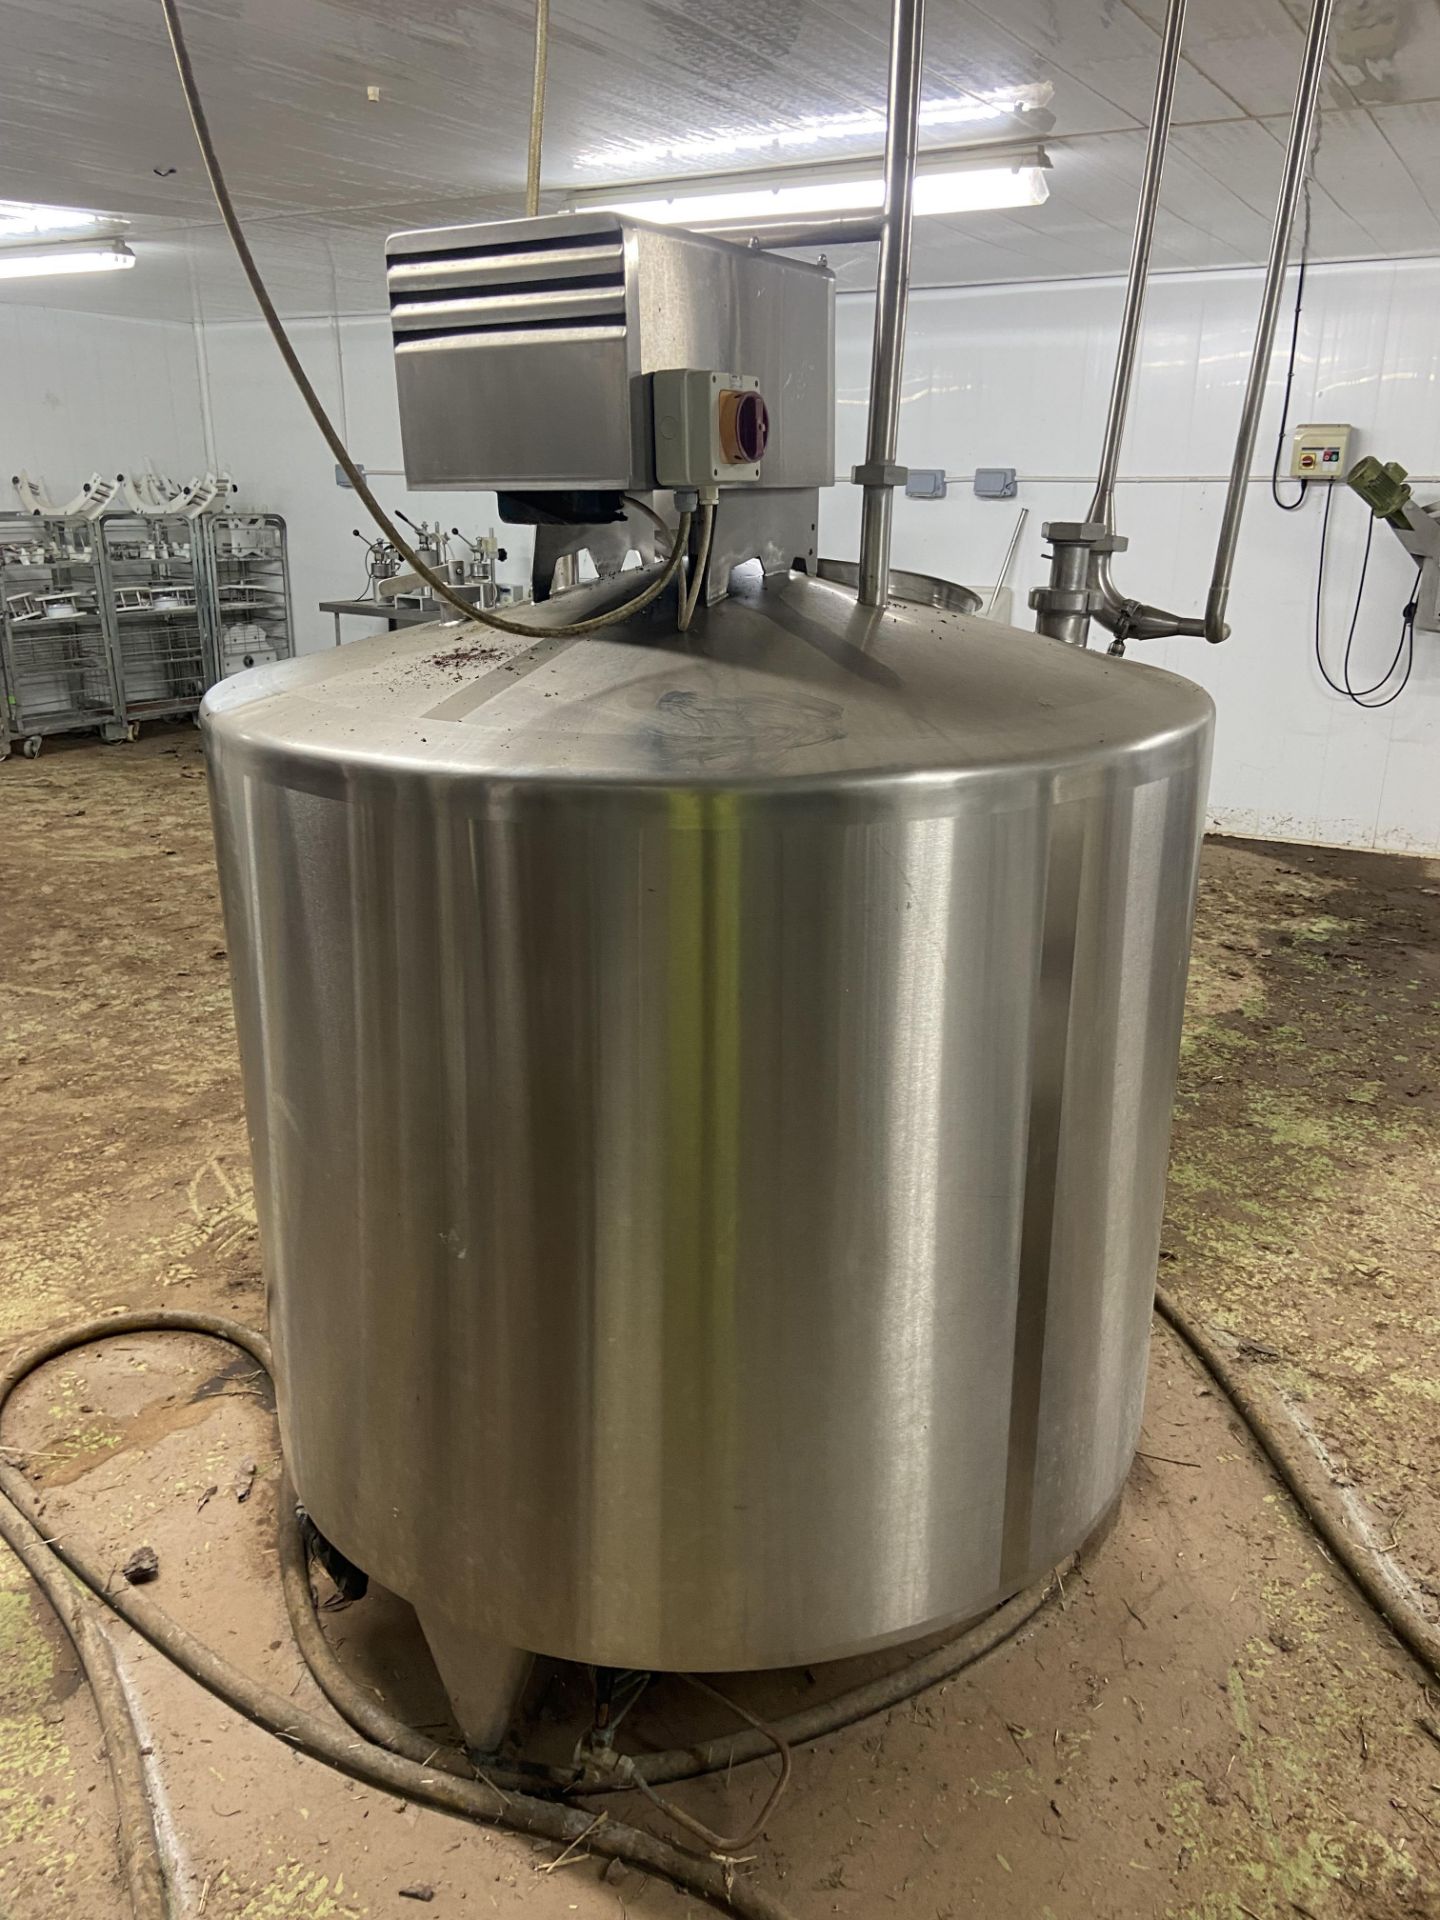 STAINLESS STEEL 1000 litre CREAM MIXING VESSEL, serial no. 881531, approx. 1.3m x 1.1m deep, with - Image 6 of 6